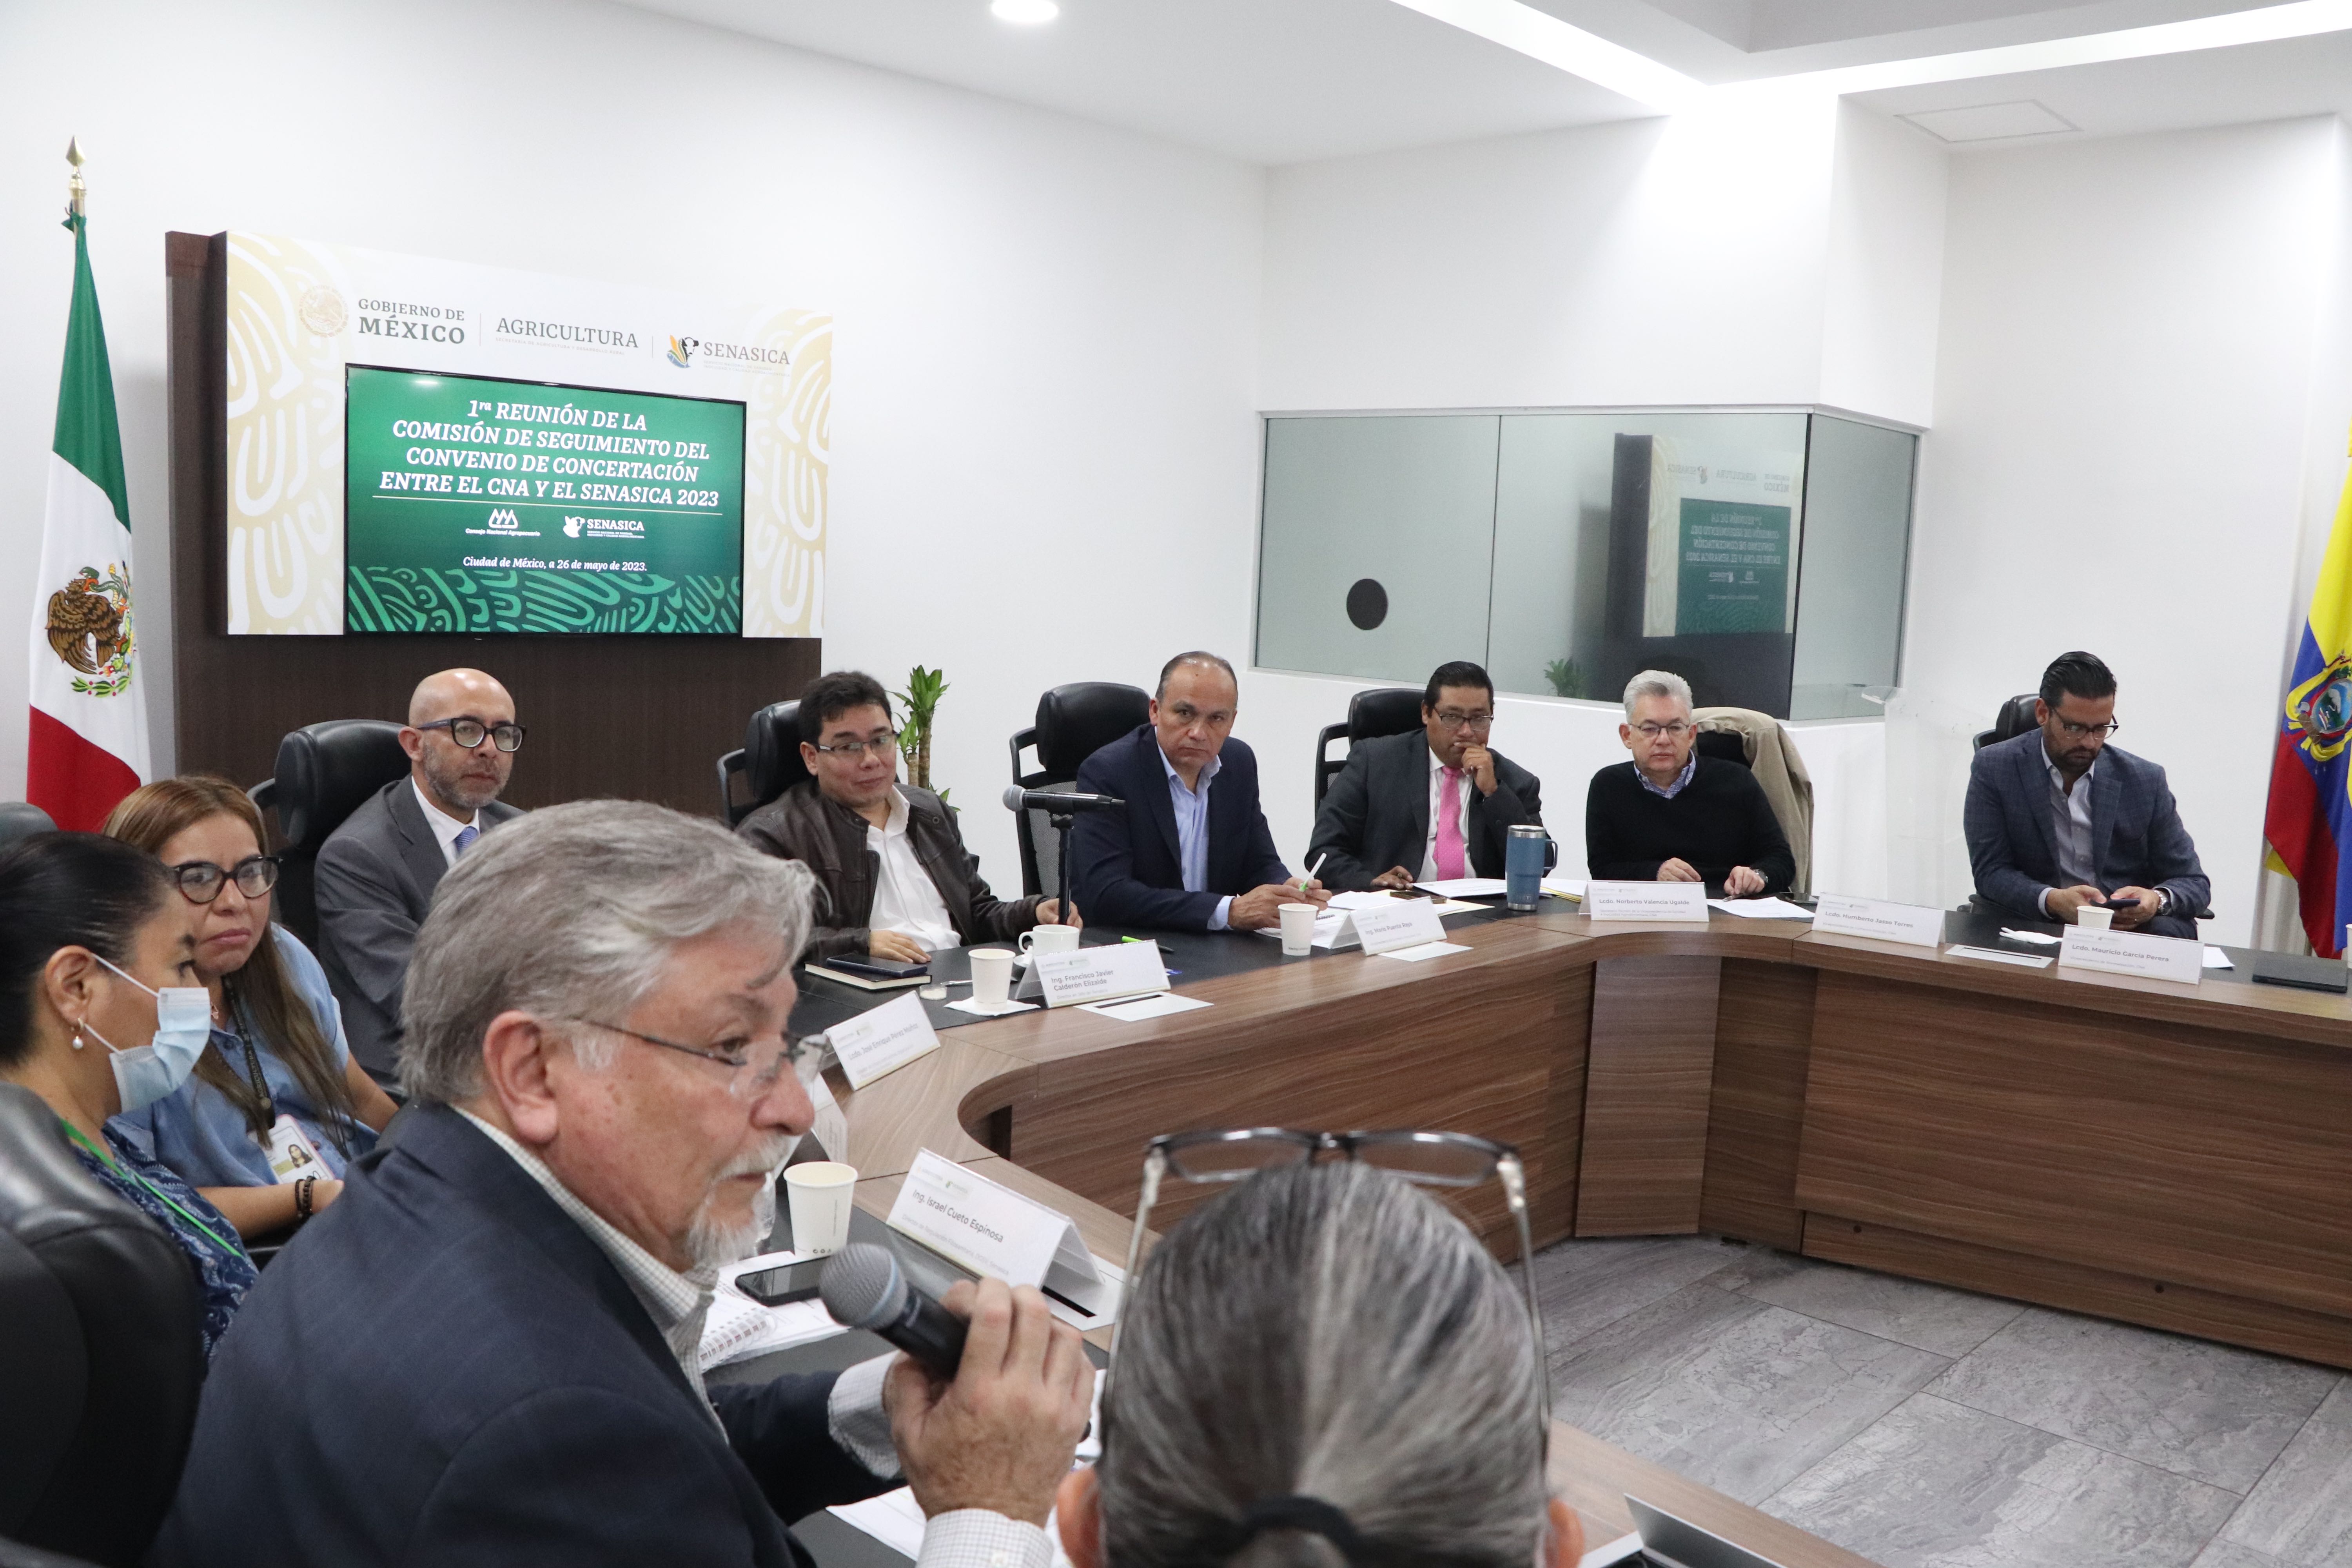 These tasks are carried out within the framework of the Concertation Agreement, signed by the heads of the Agriculture agency and the National Agricultural Council signed in November 2020